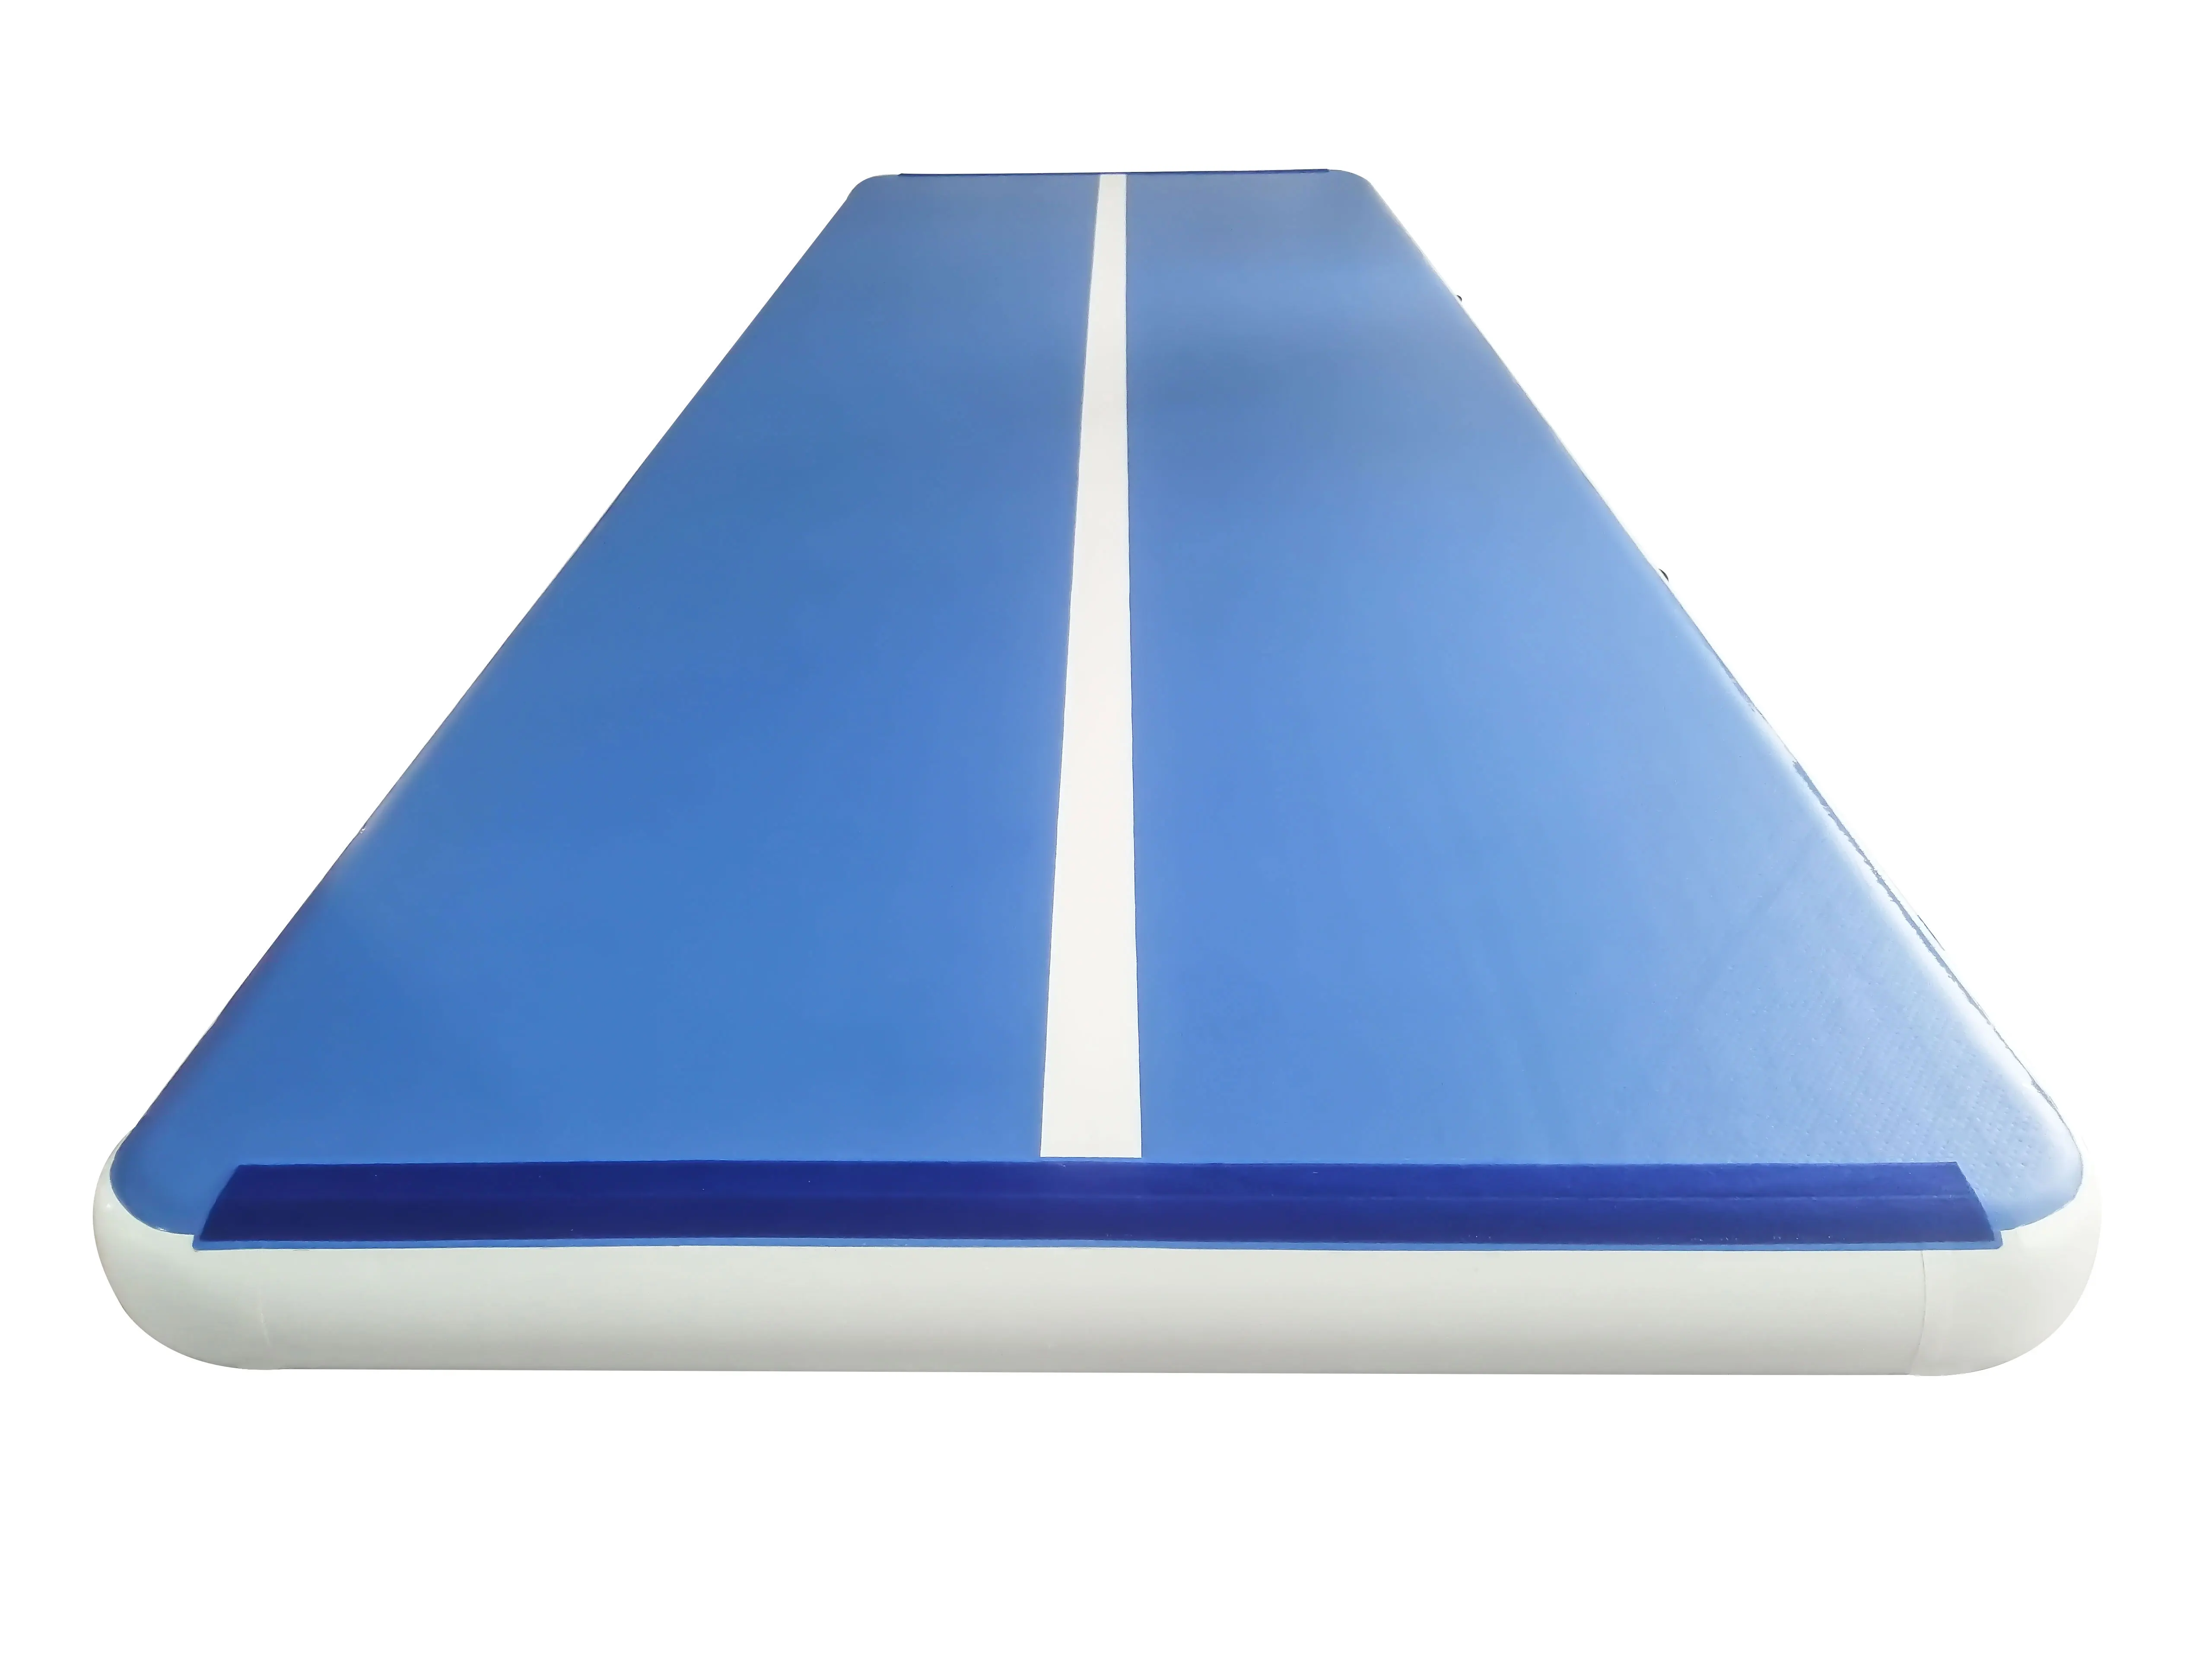 
10m Air track Outdoor Mattress Gymnastics used Inflatable Air track Factory 